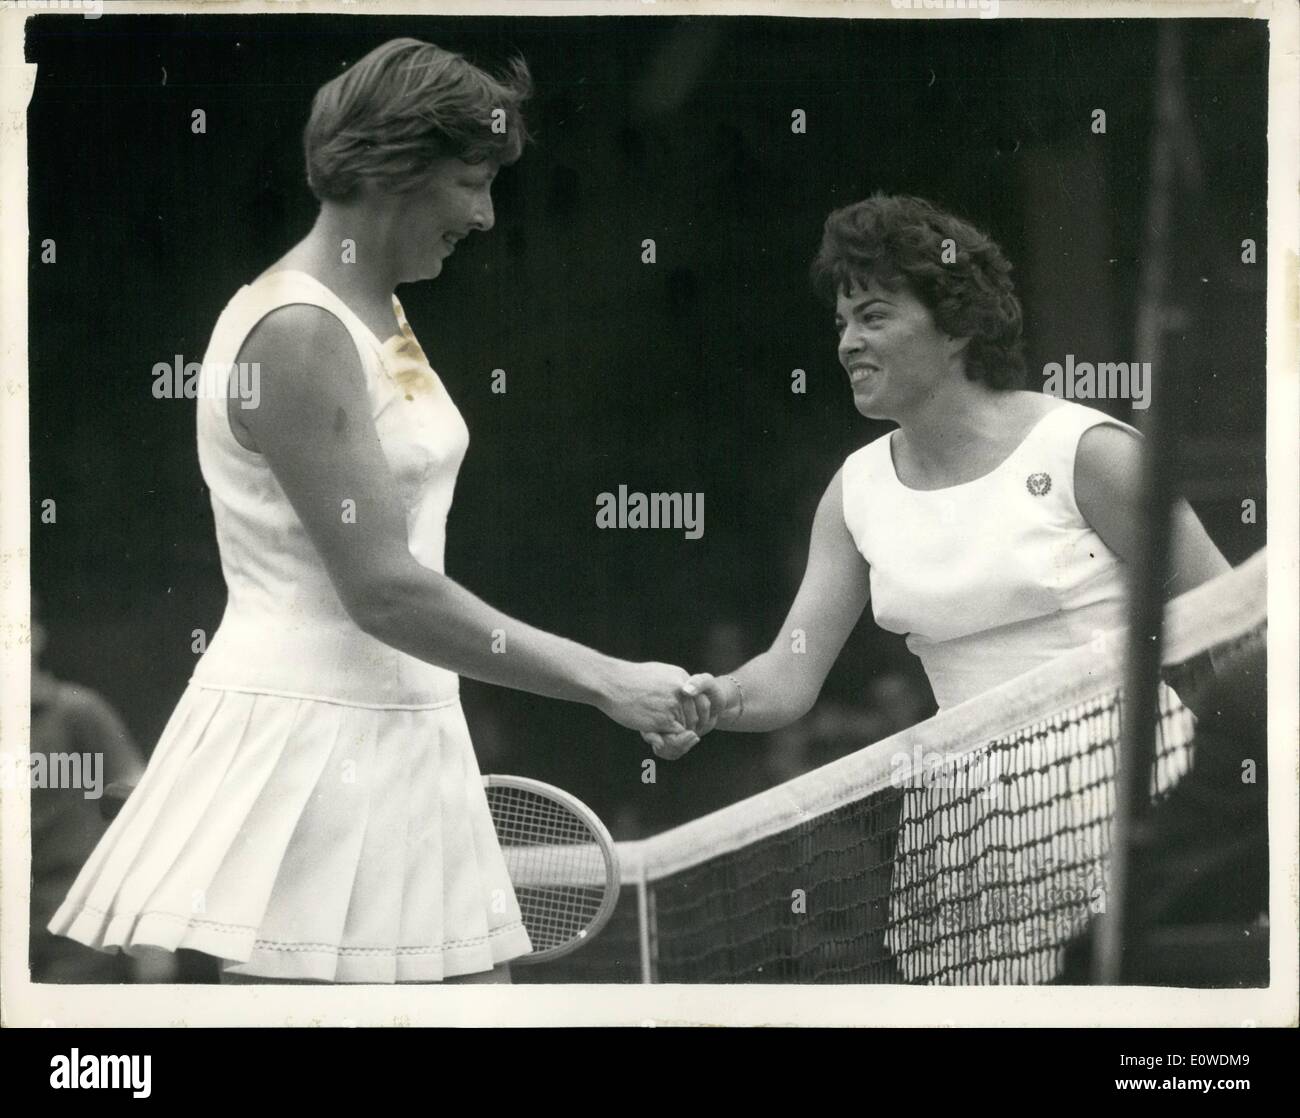 Jun. 06, 1962 - Wimbledon tennis championship -third day. Christine wins  match in twenty minutes. photo shows Christine Truman is all smiles as the  shakes hands with Miss E.A. Green (n.z) after